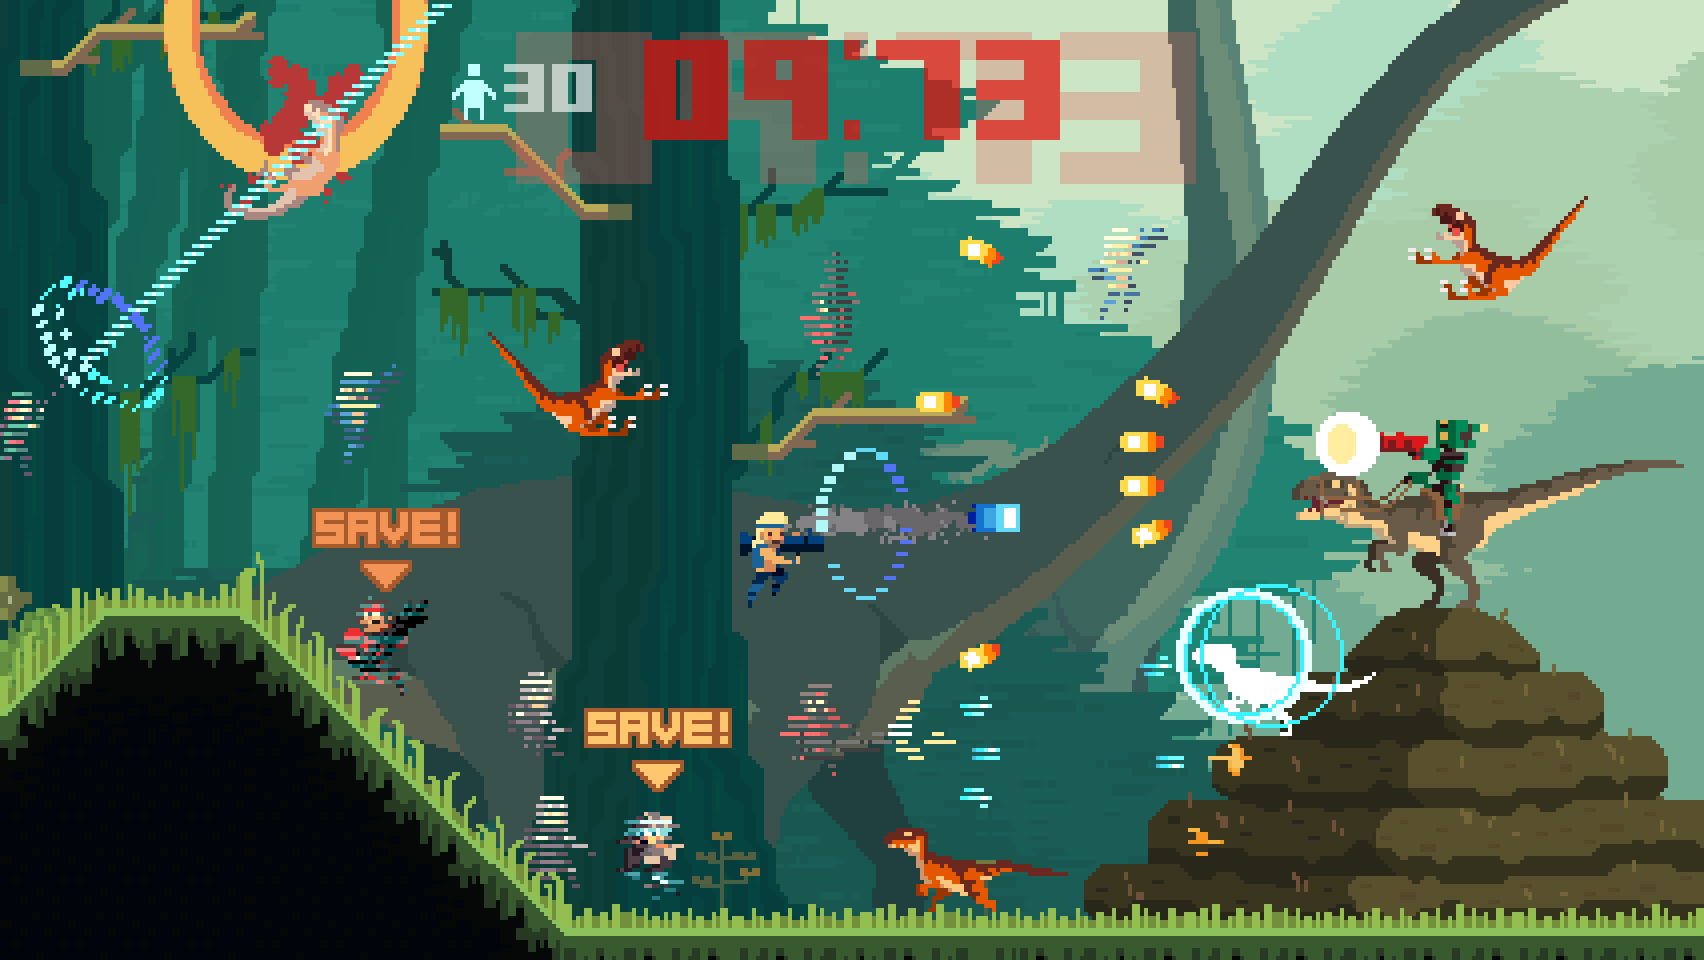 Super Time Force Brings Robots, Lasers, Dinosaurs and Time Travelling to XBLA